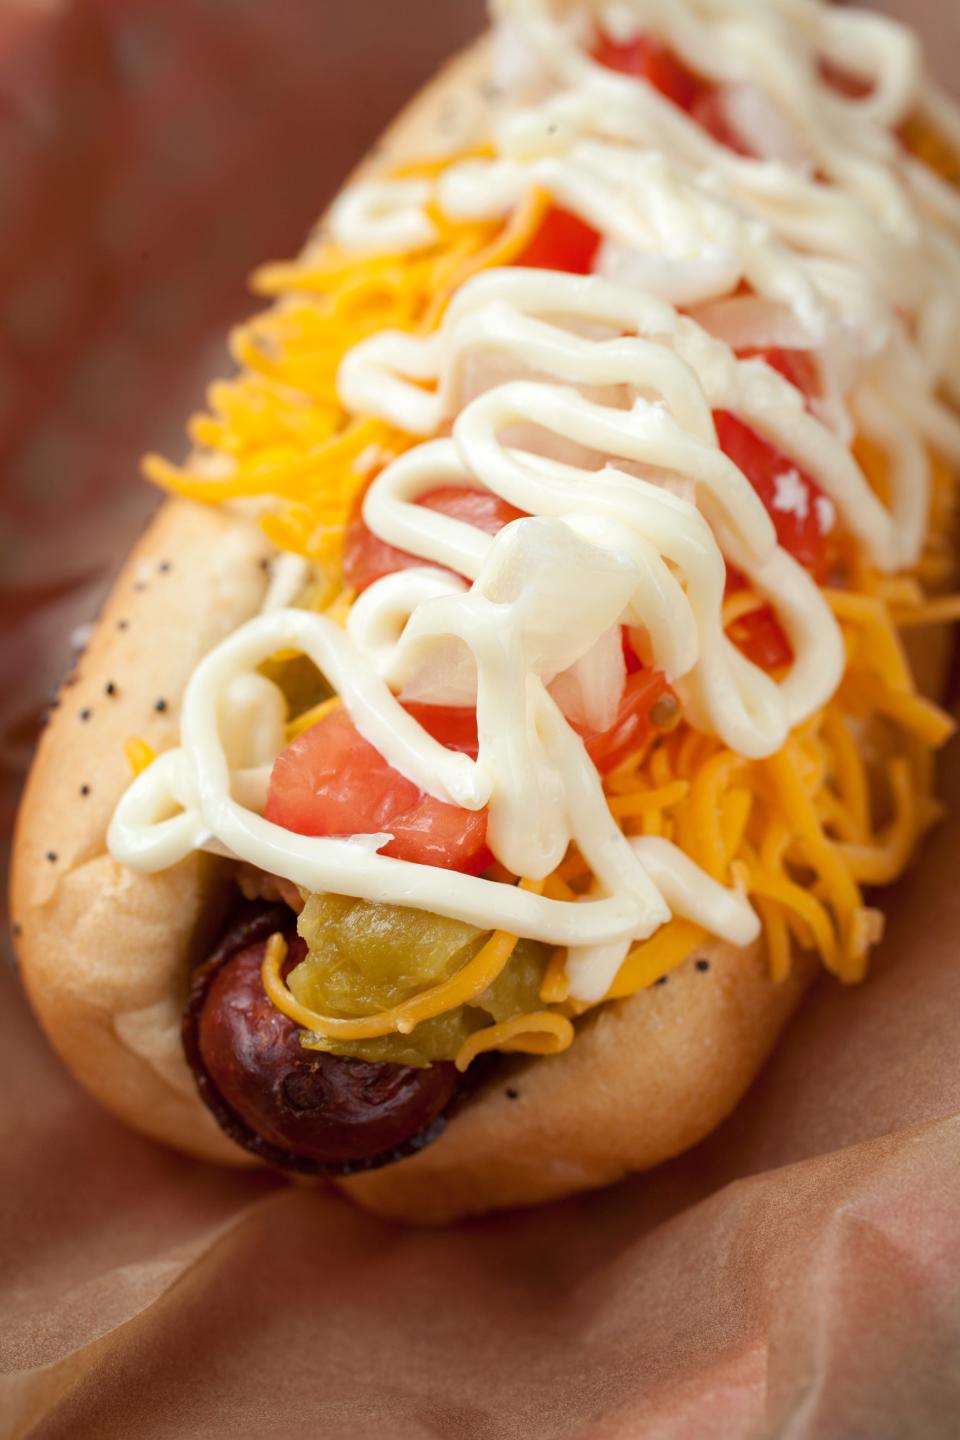 A hot dog from Dirty Frank's